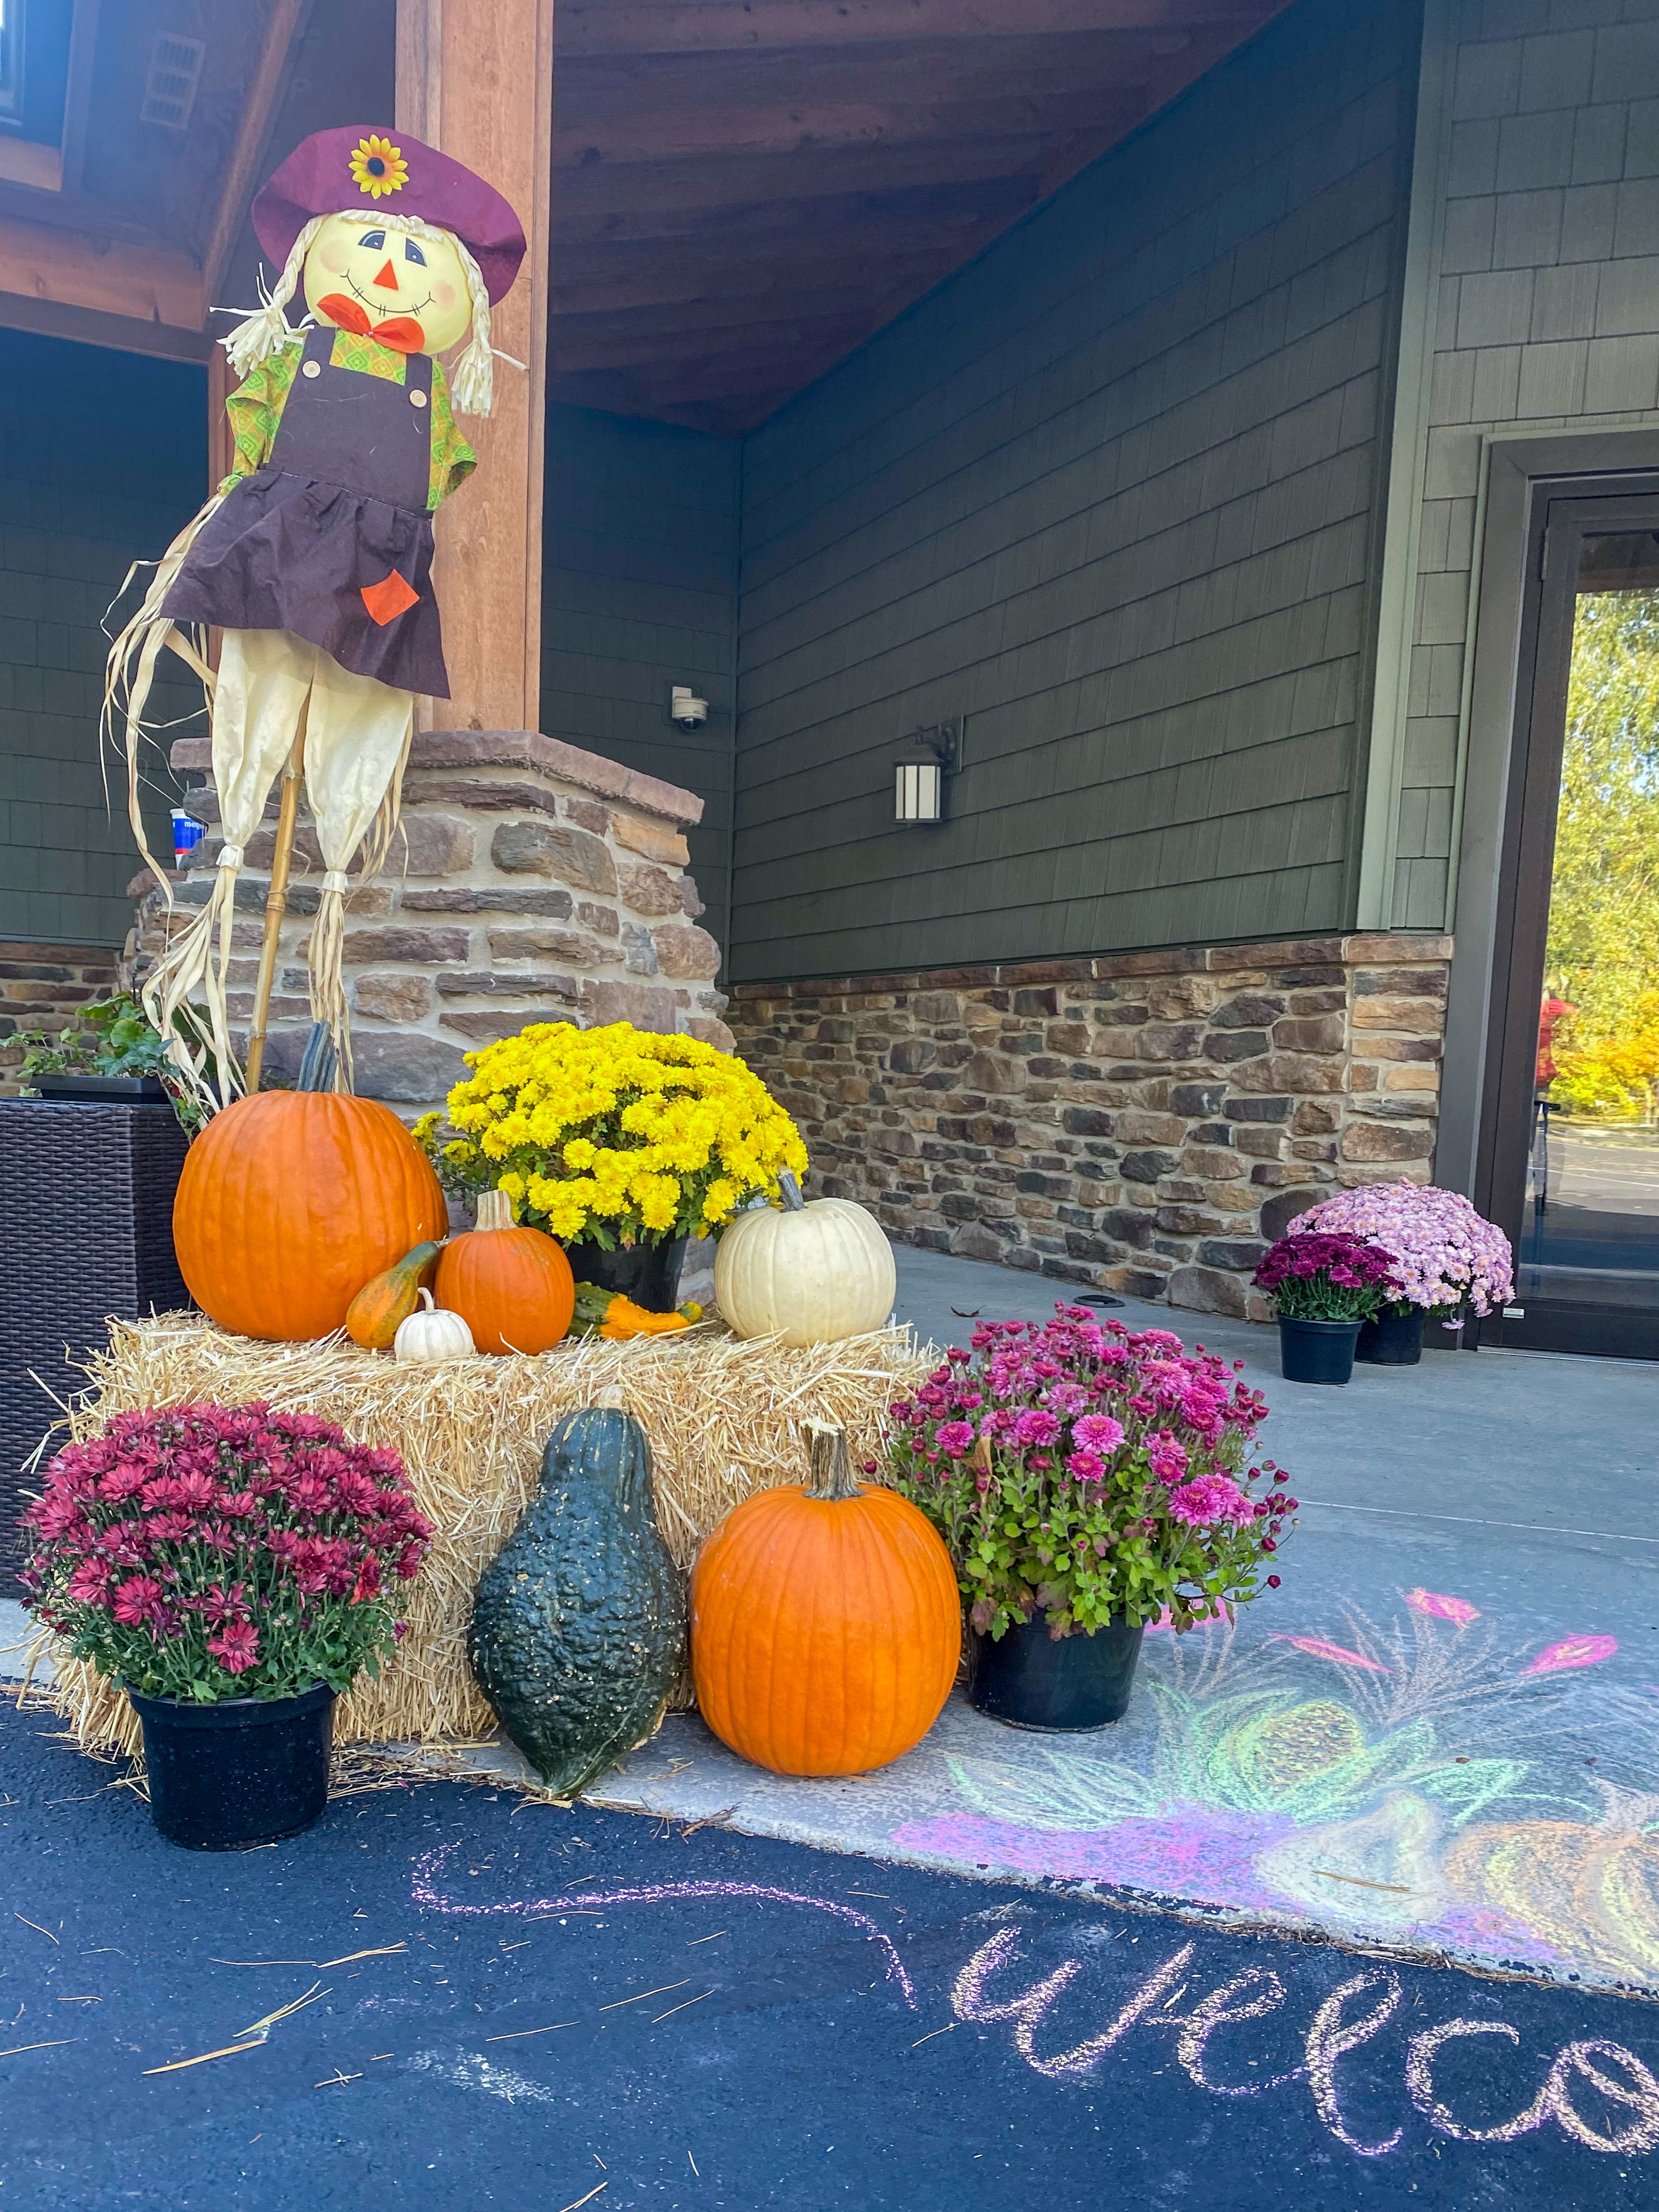 A friendly scarecrow and other decorations around the Beaman Home's front entrance